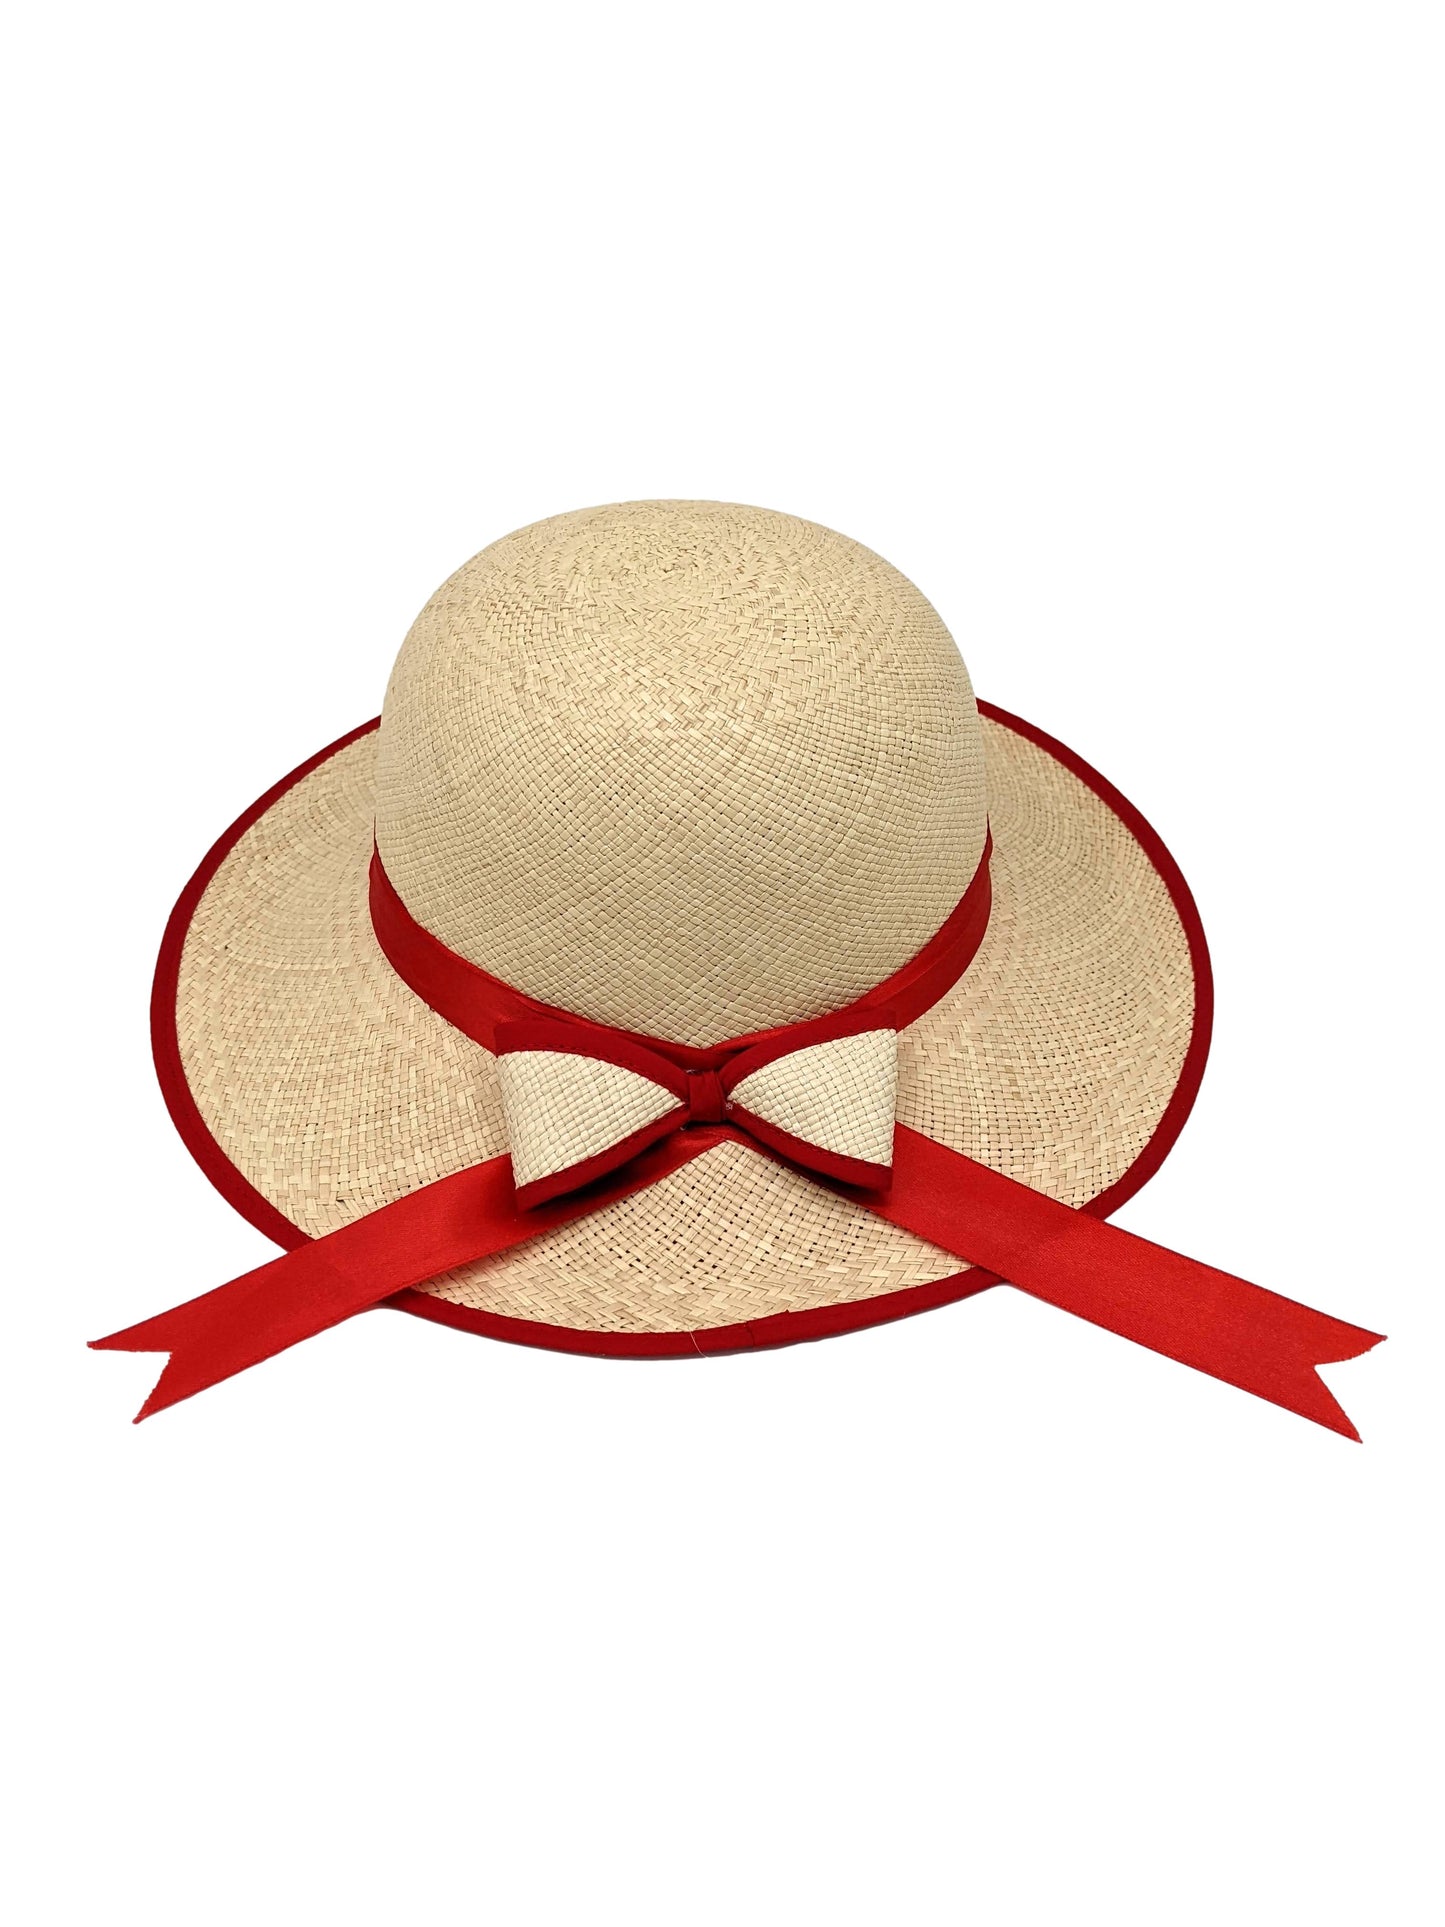 Ladies Panama Hat with Red Bow